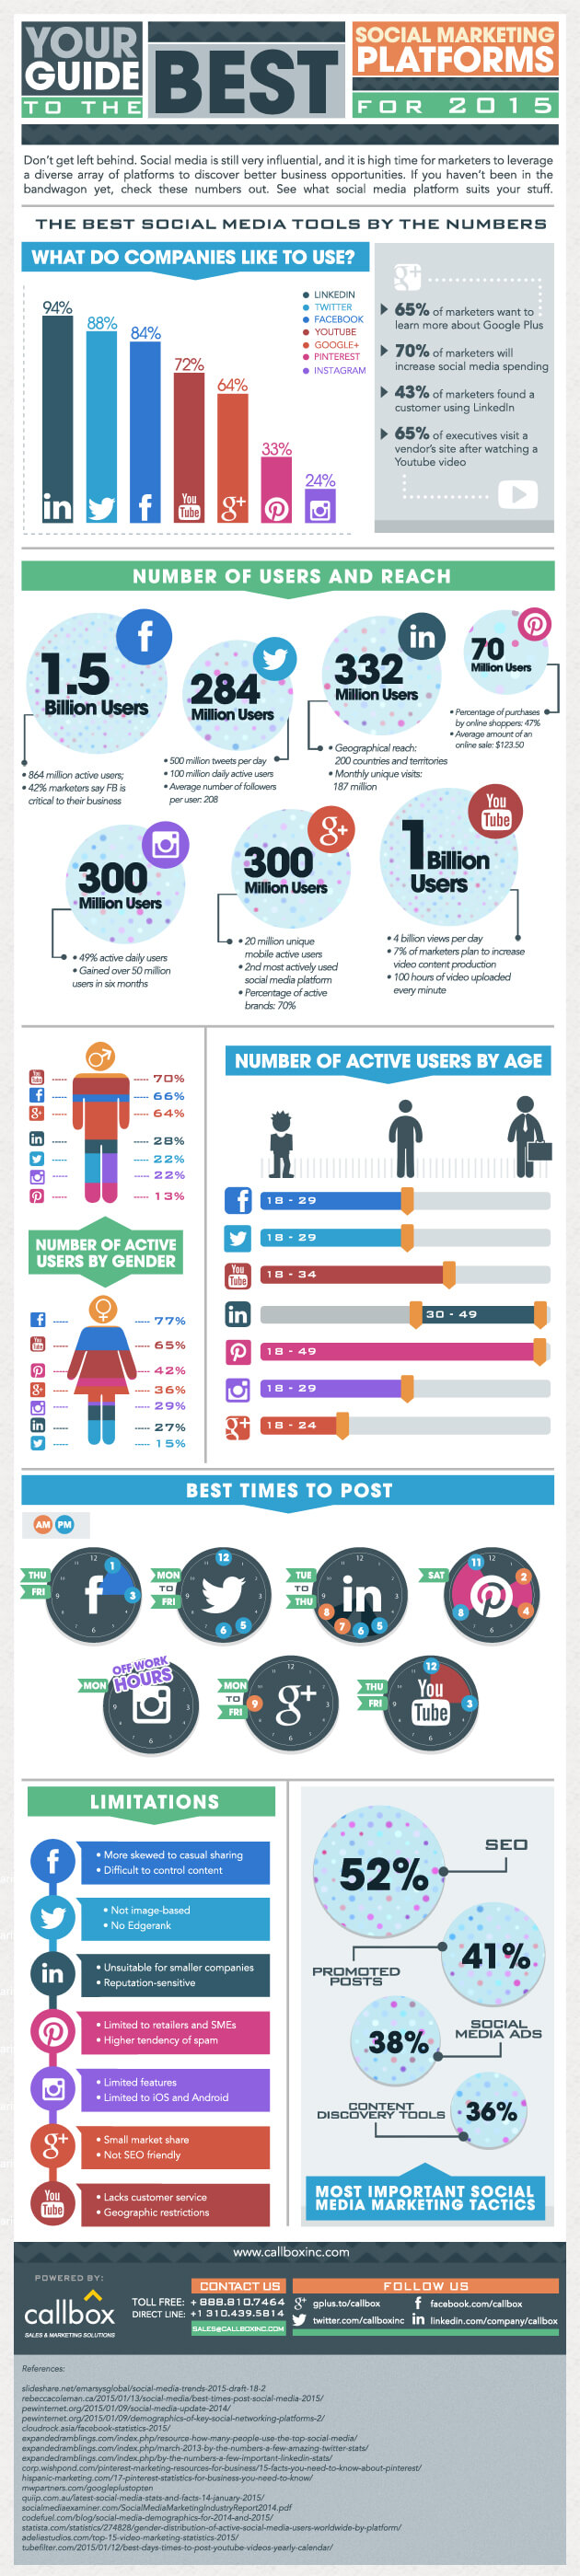 Your Guide to the Best Social Marketing Platforms for 2015